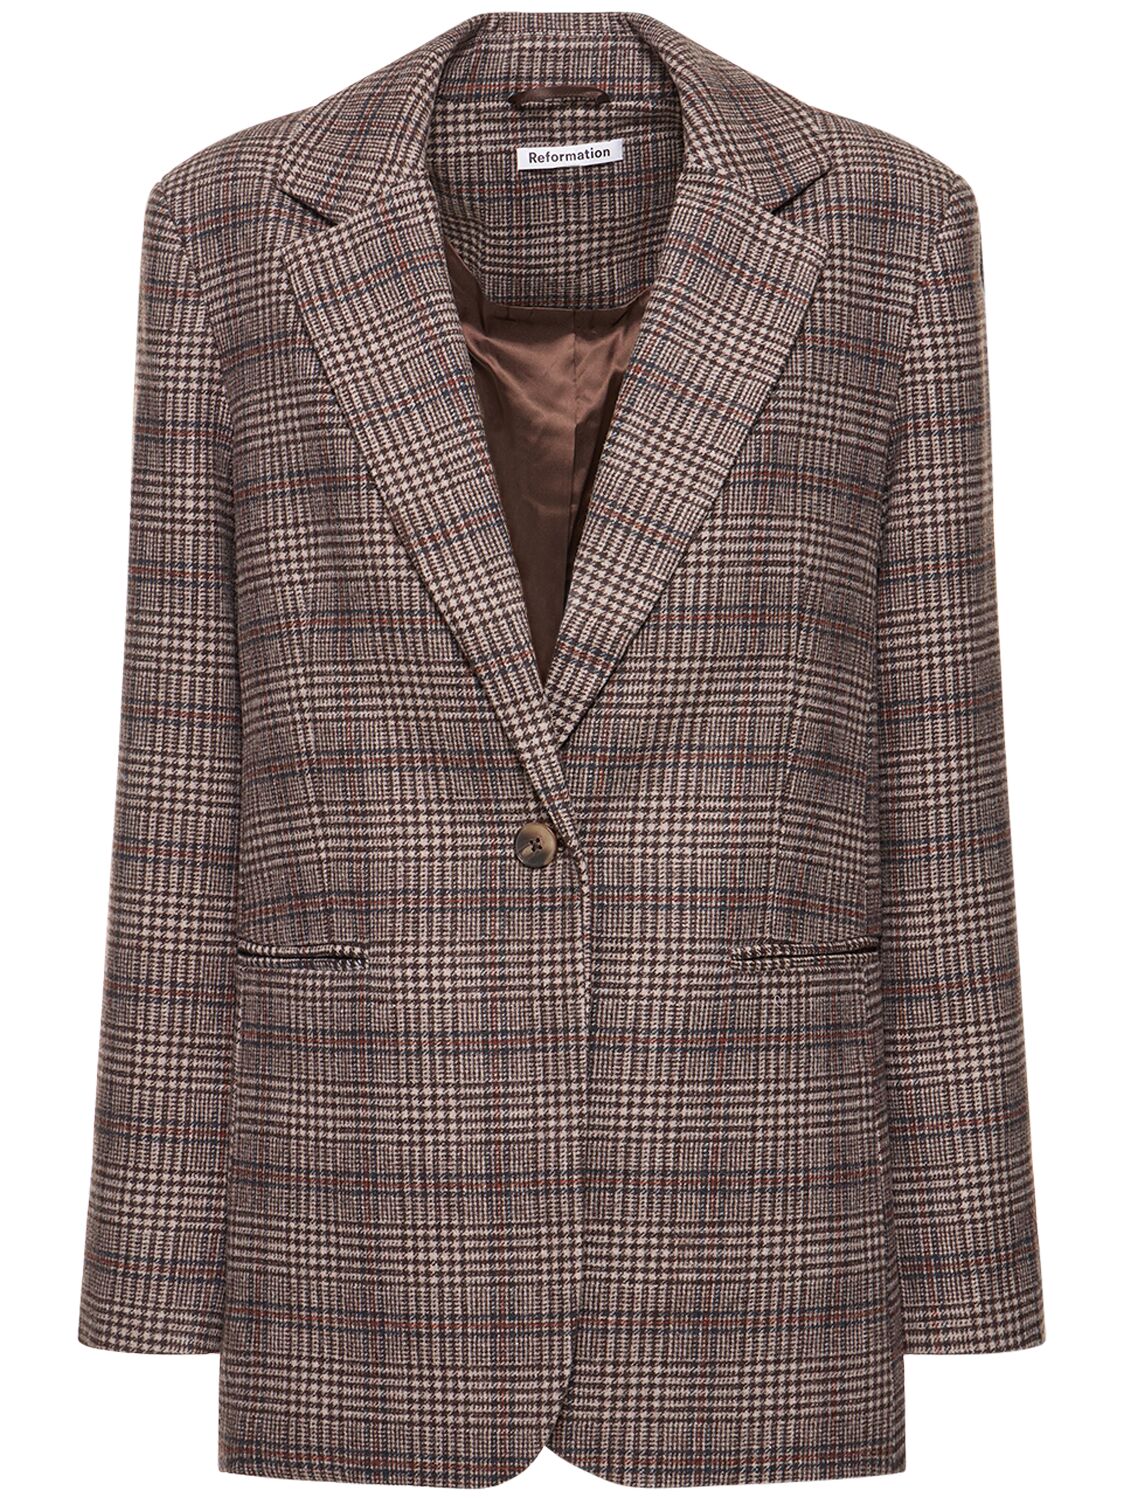 The Classic Relaxed Wool Blend Blazer